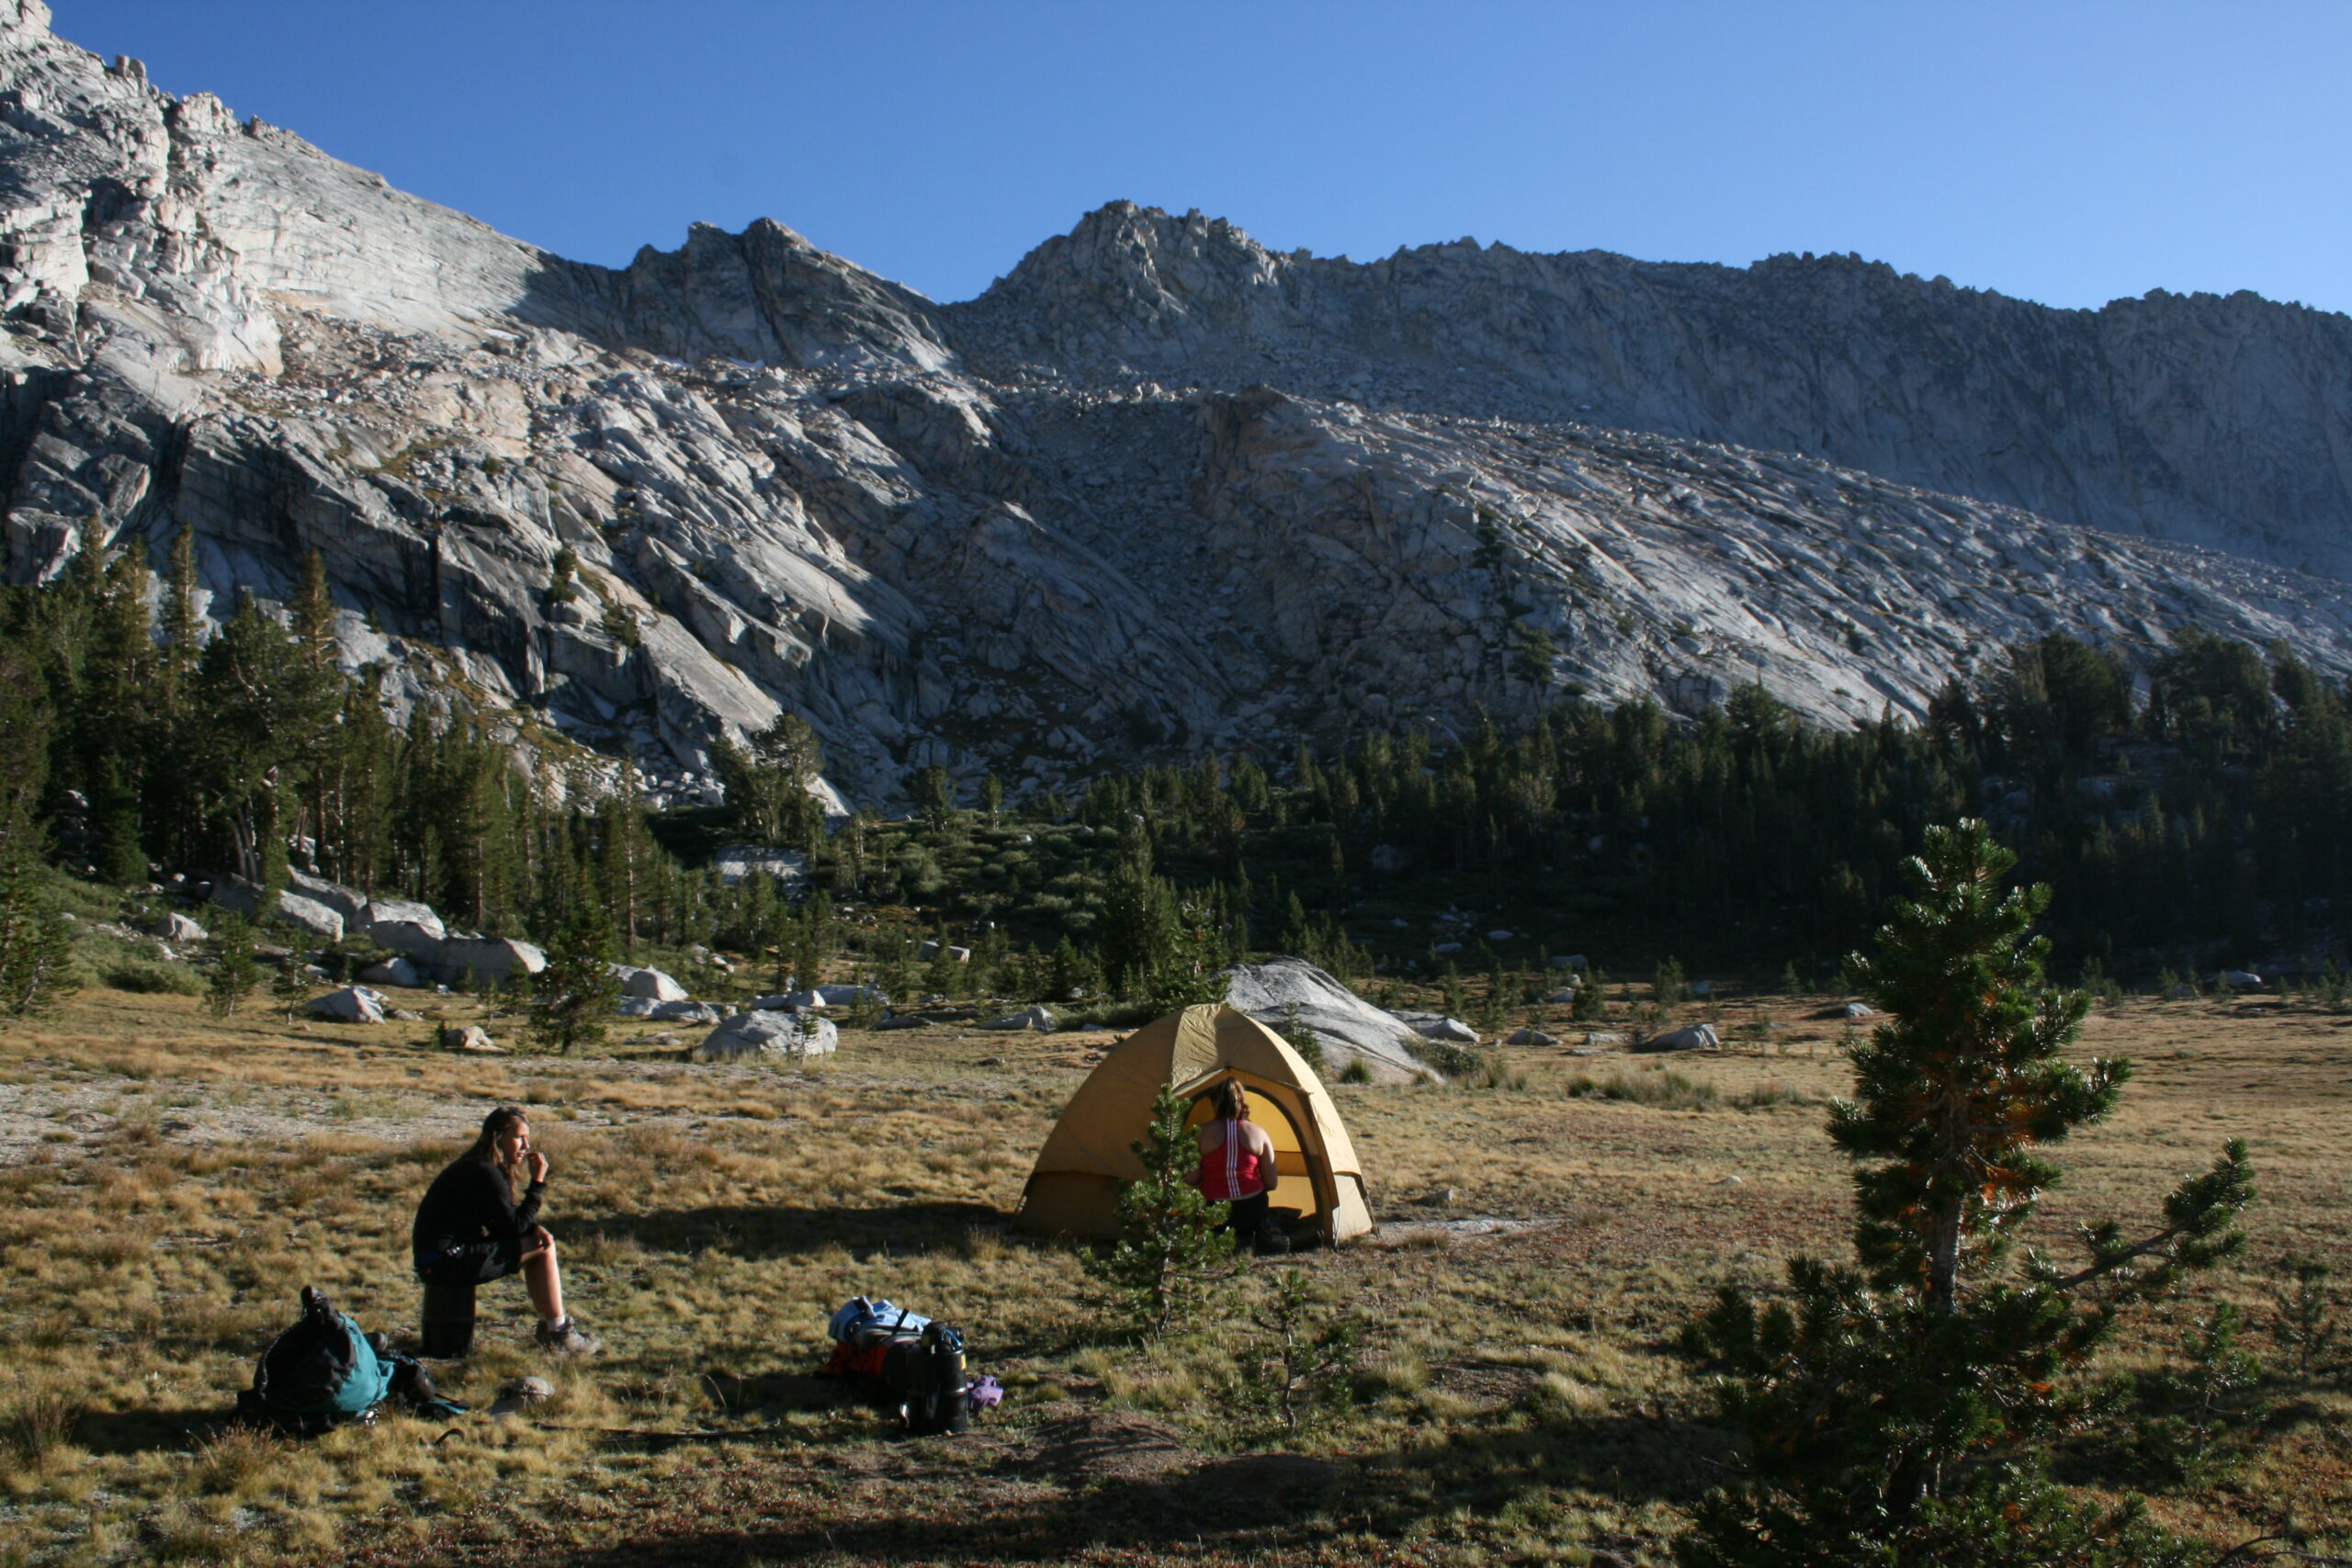 Wini, Wendy with tent in Tuolumne Meadows at Young Lakes